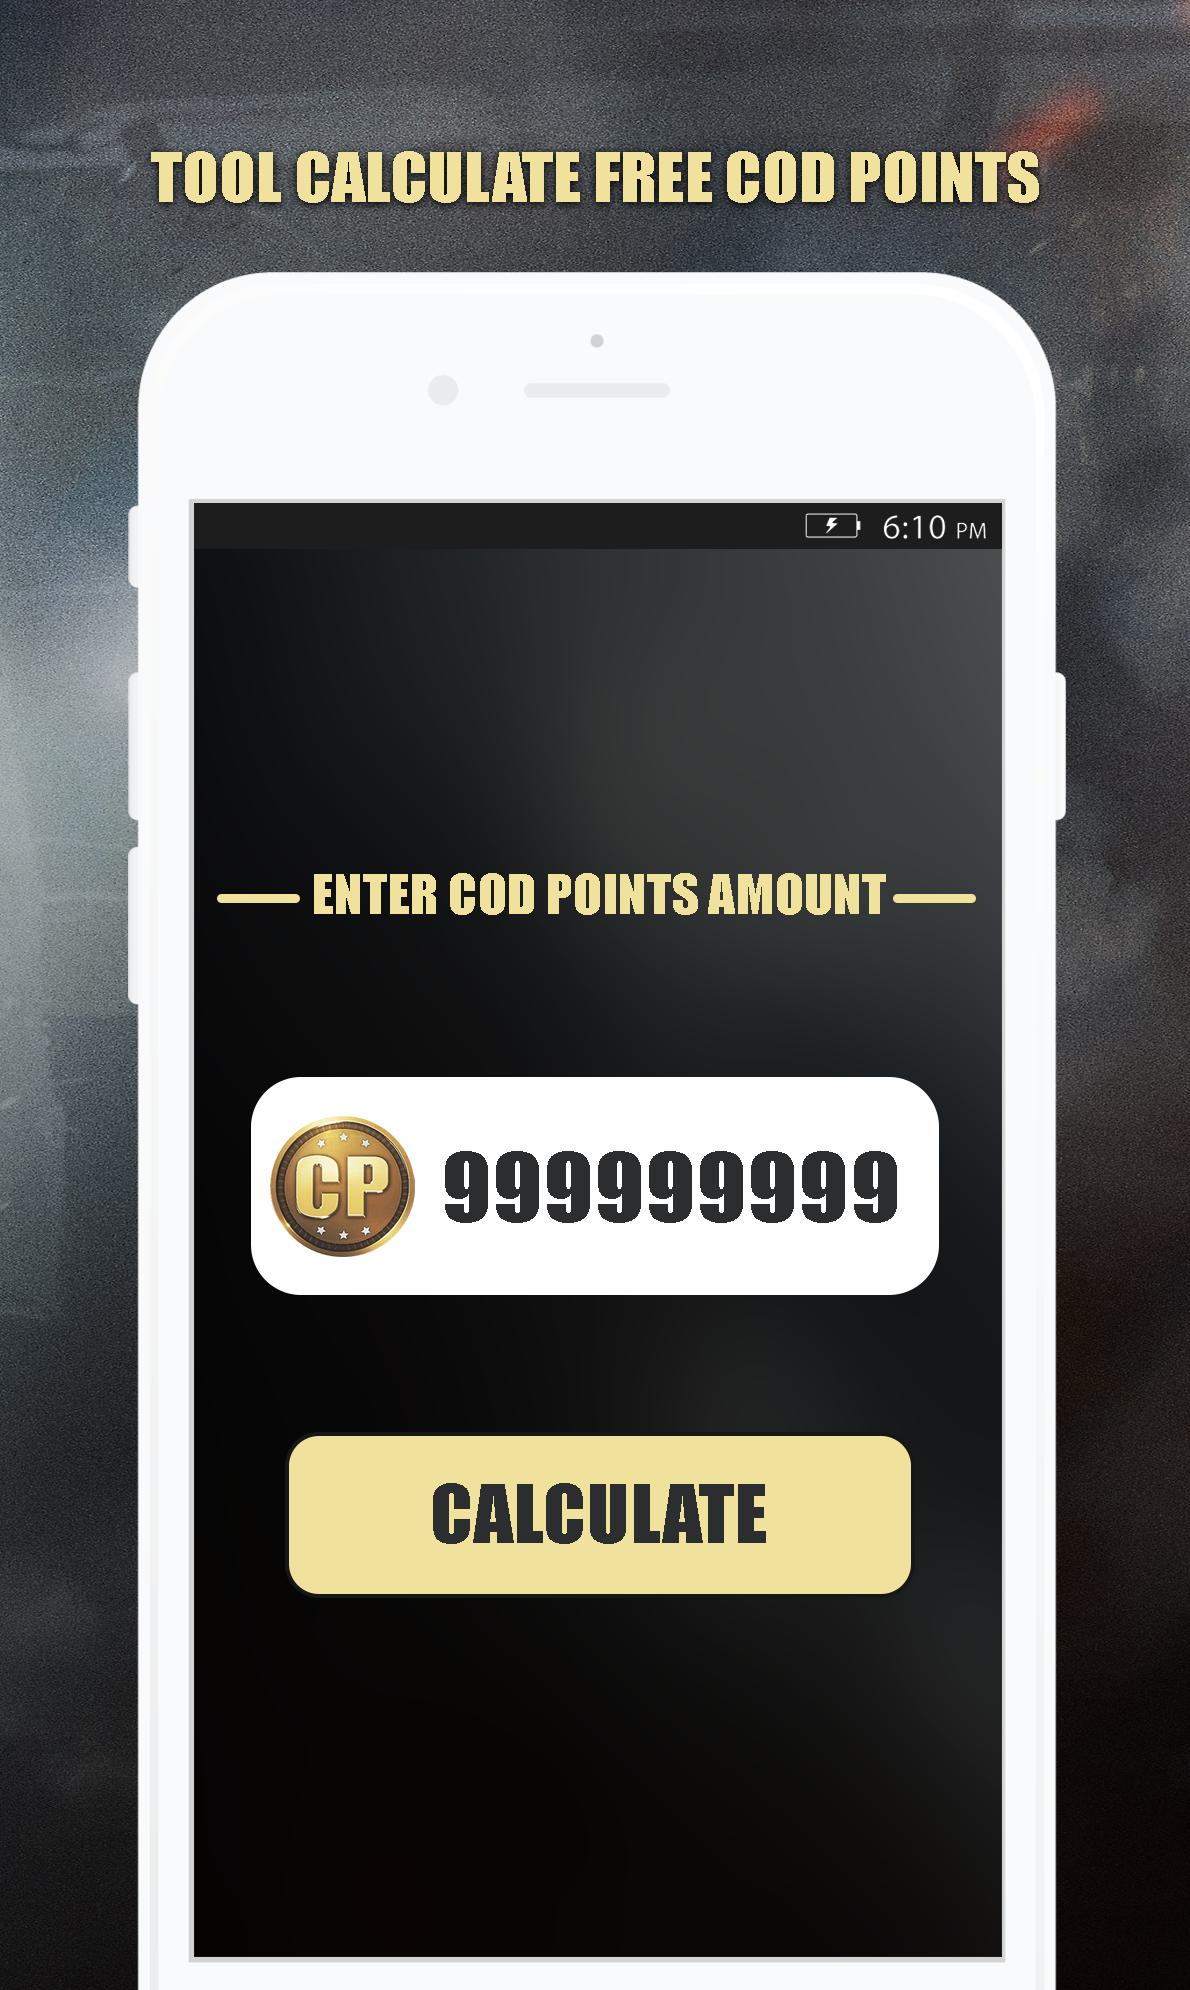 [Unlimited 9999] Free Cod Points & Credits Call Of Duty Mobile Latest Mod Apk